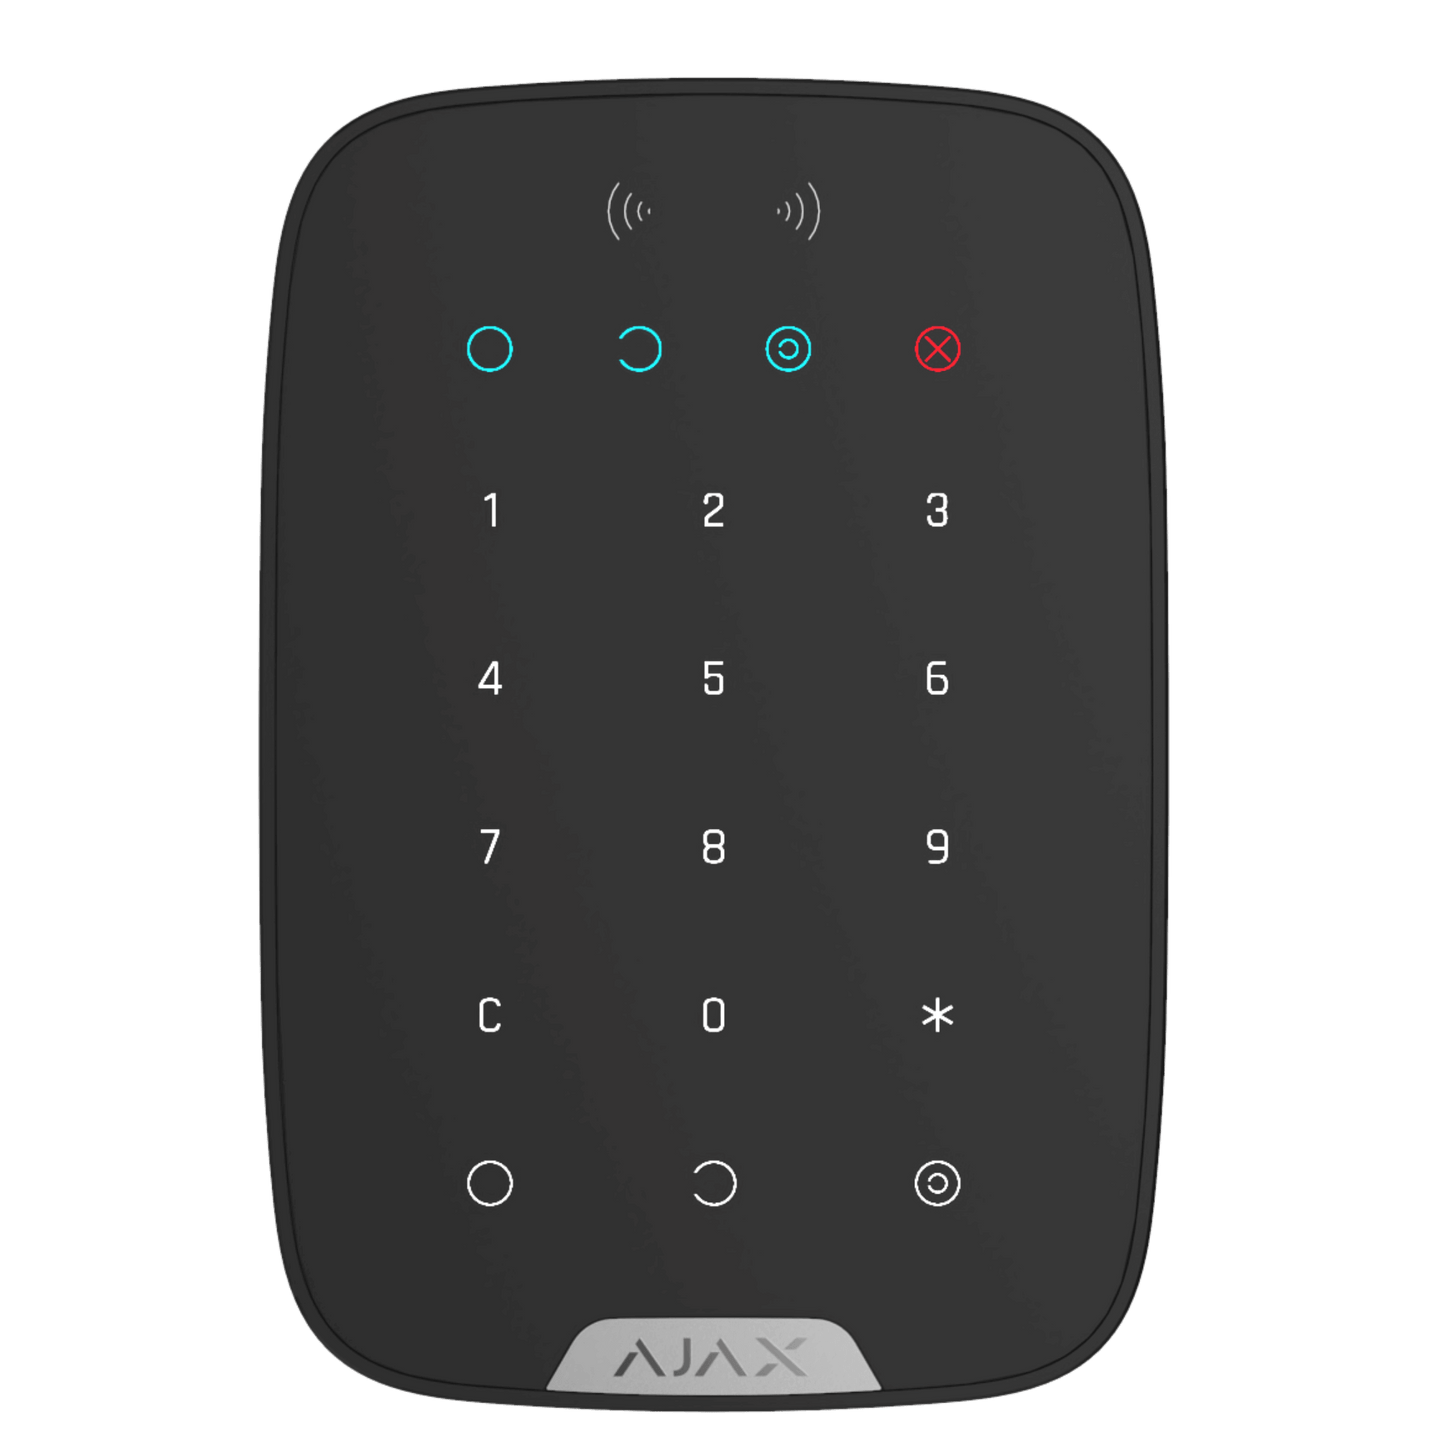 Black Ajax KeyPad Plus a wireless touch keypad for home security, 165 × 113 × 20 mm in size, 267 grams in weight. used for the the Ajax security system, front view of device